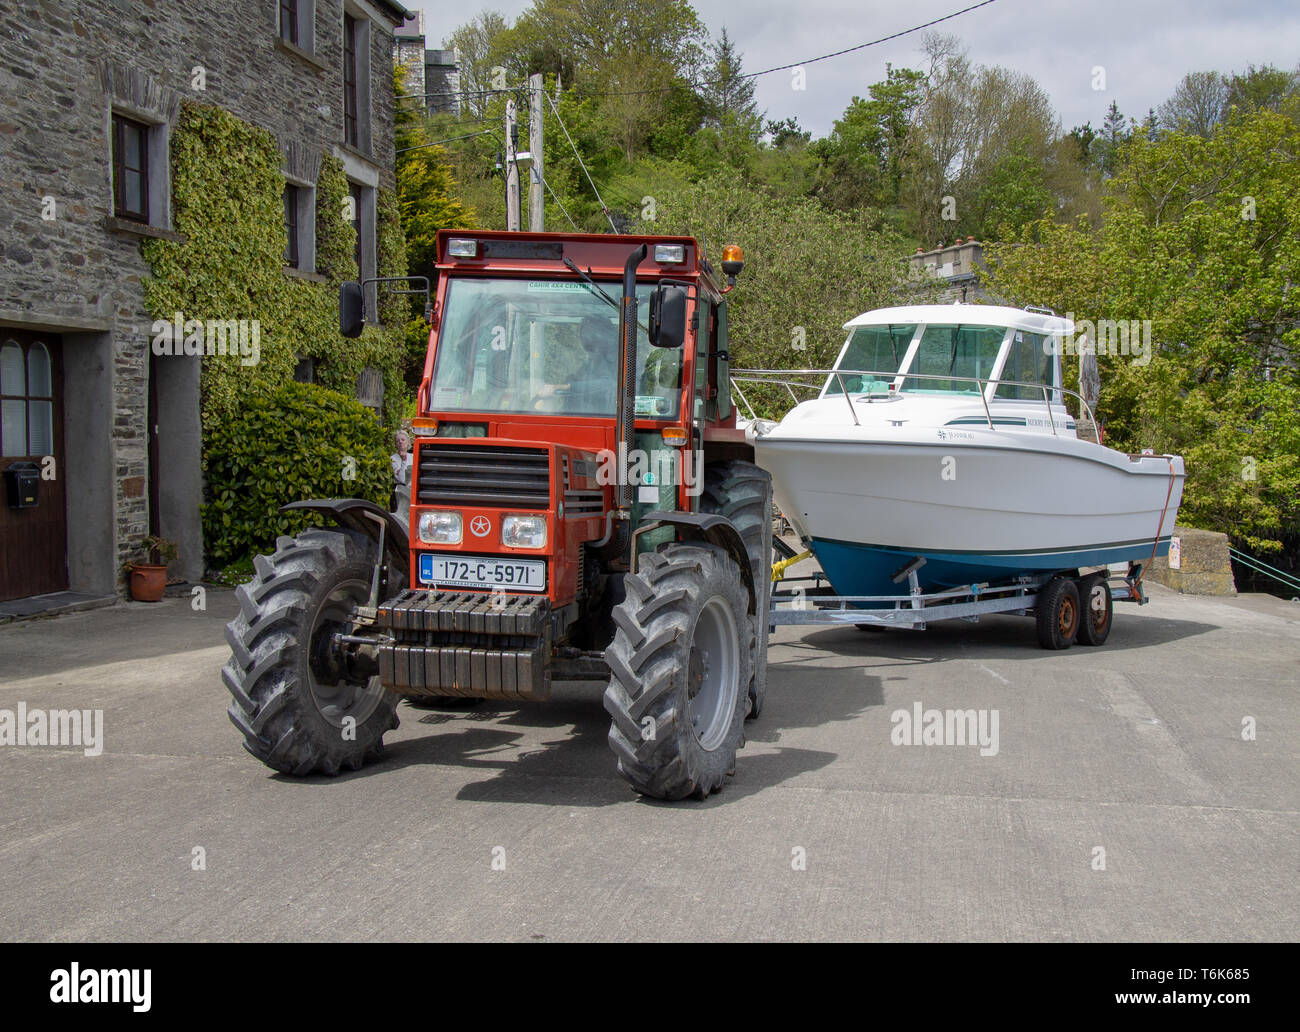 tractor pushing a cabin cruiser motor boat on a trailer back onto a slipway Stock Photo